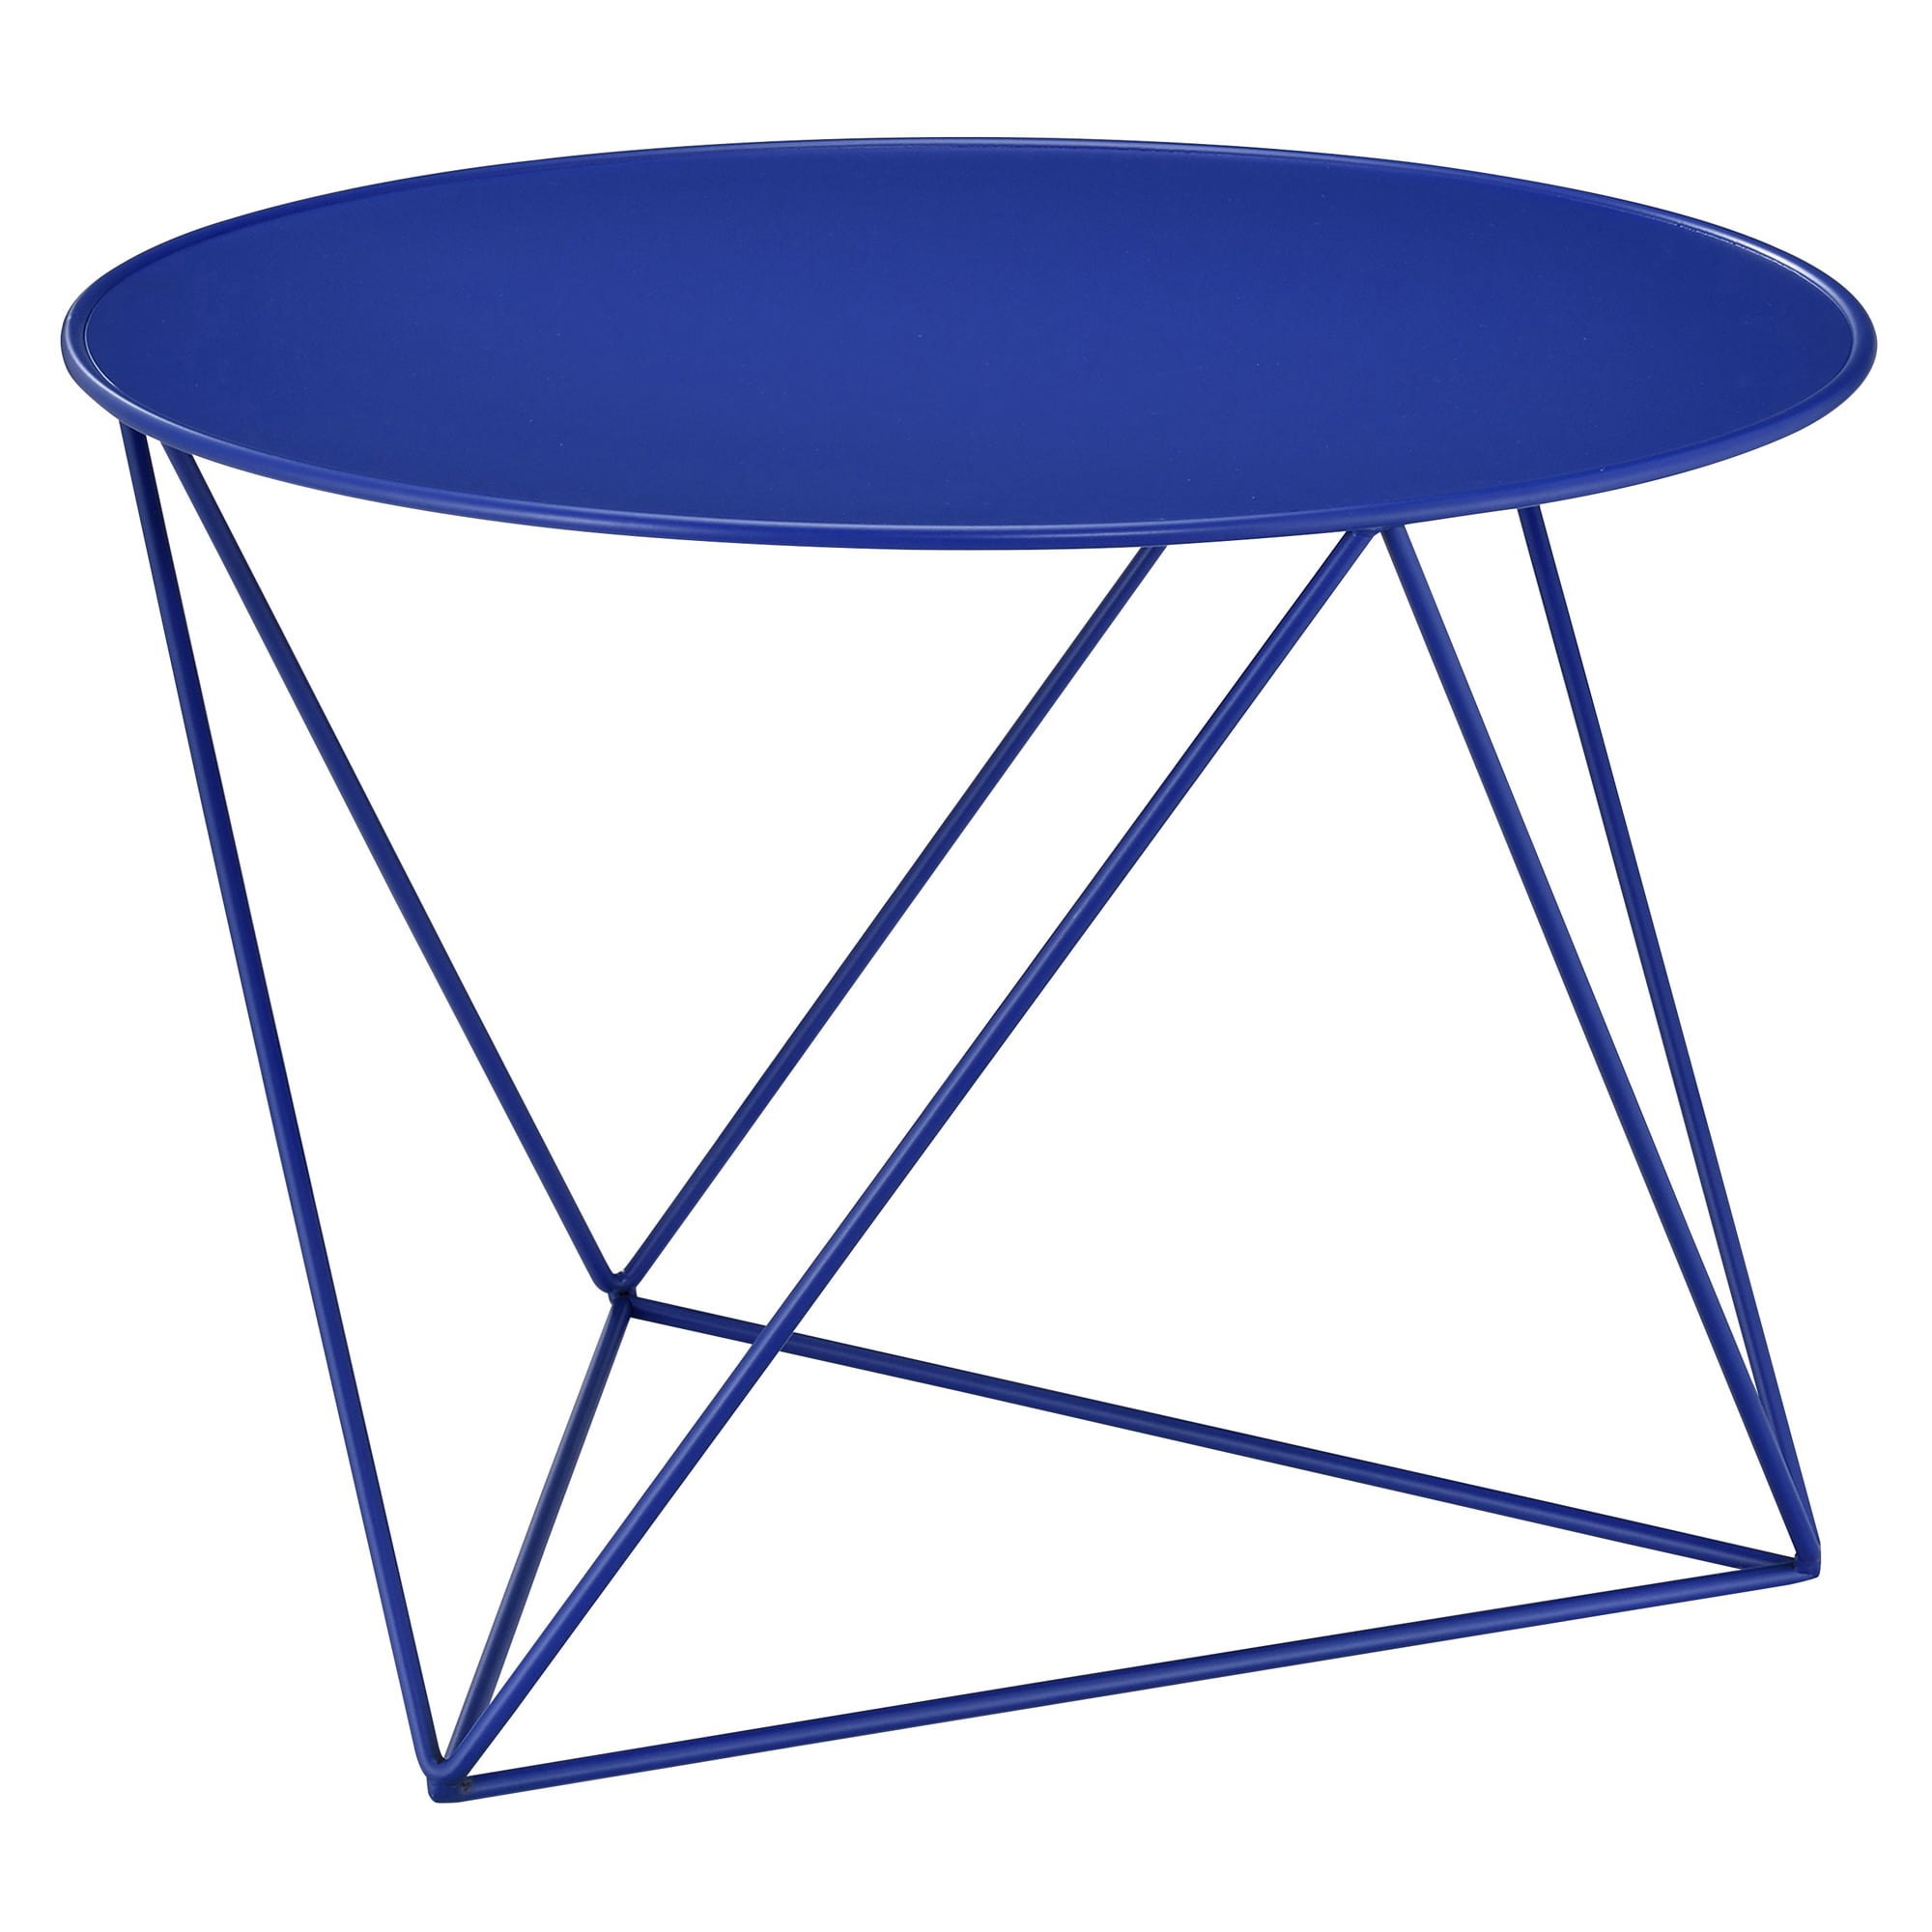 Picture of Acme Furniture 97840 17 x 23 x 23 in. Epidia Round Accent Table, Blue